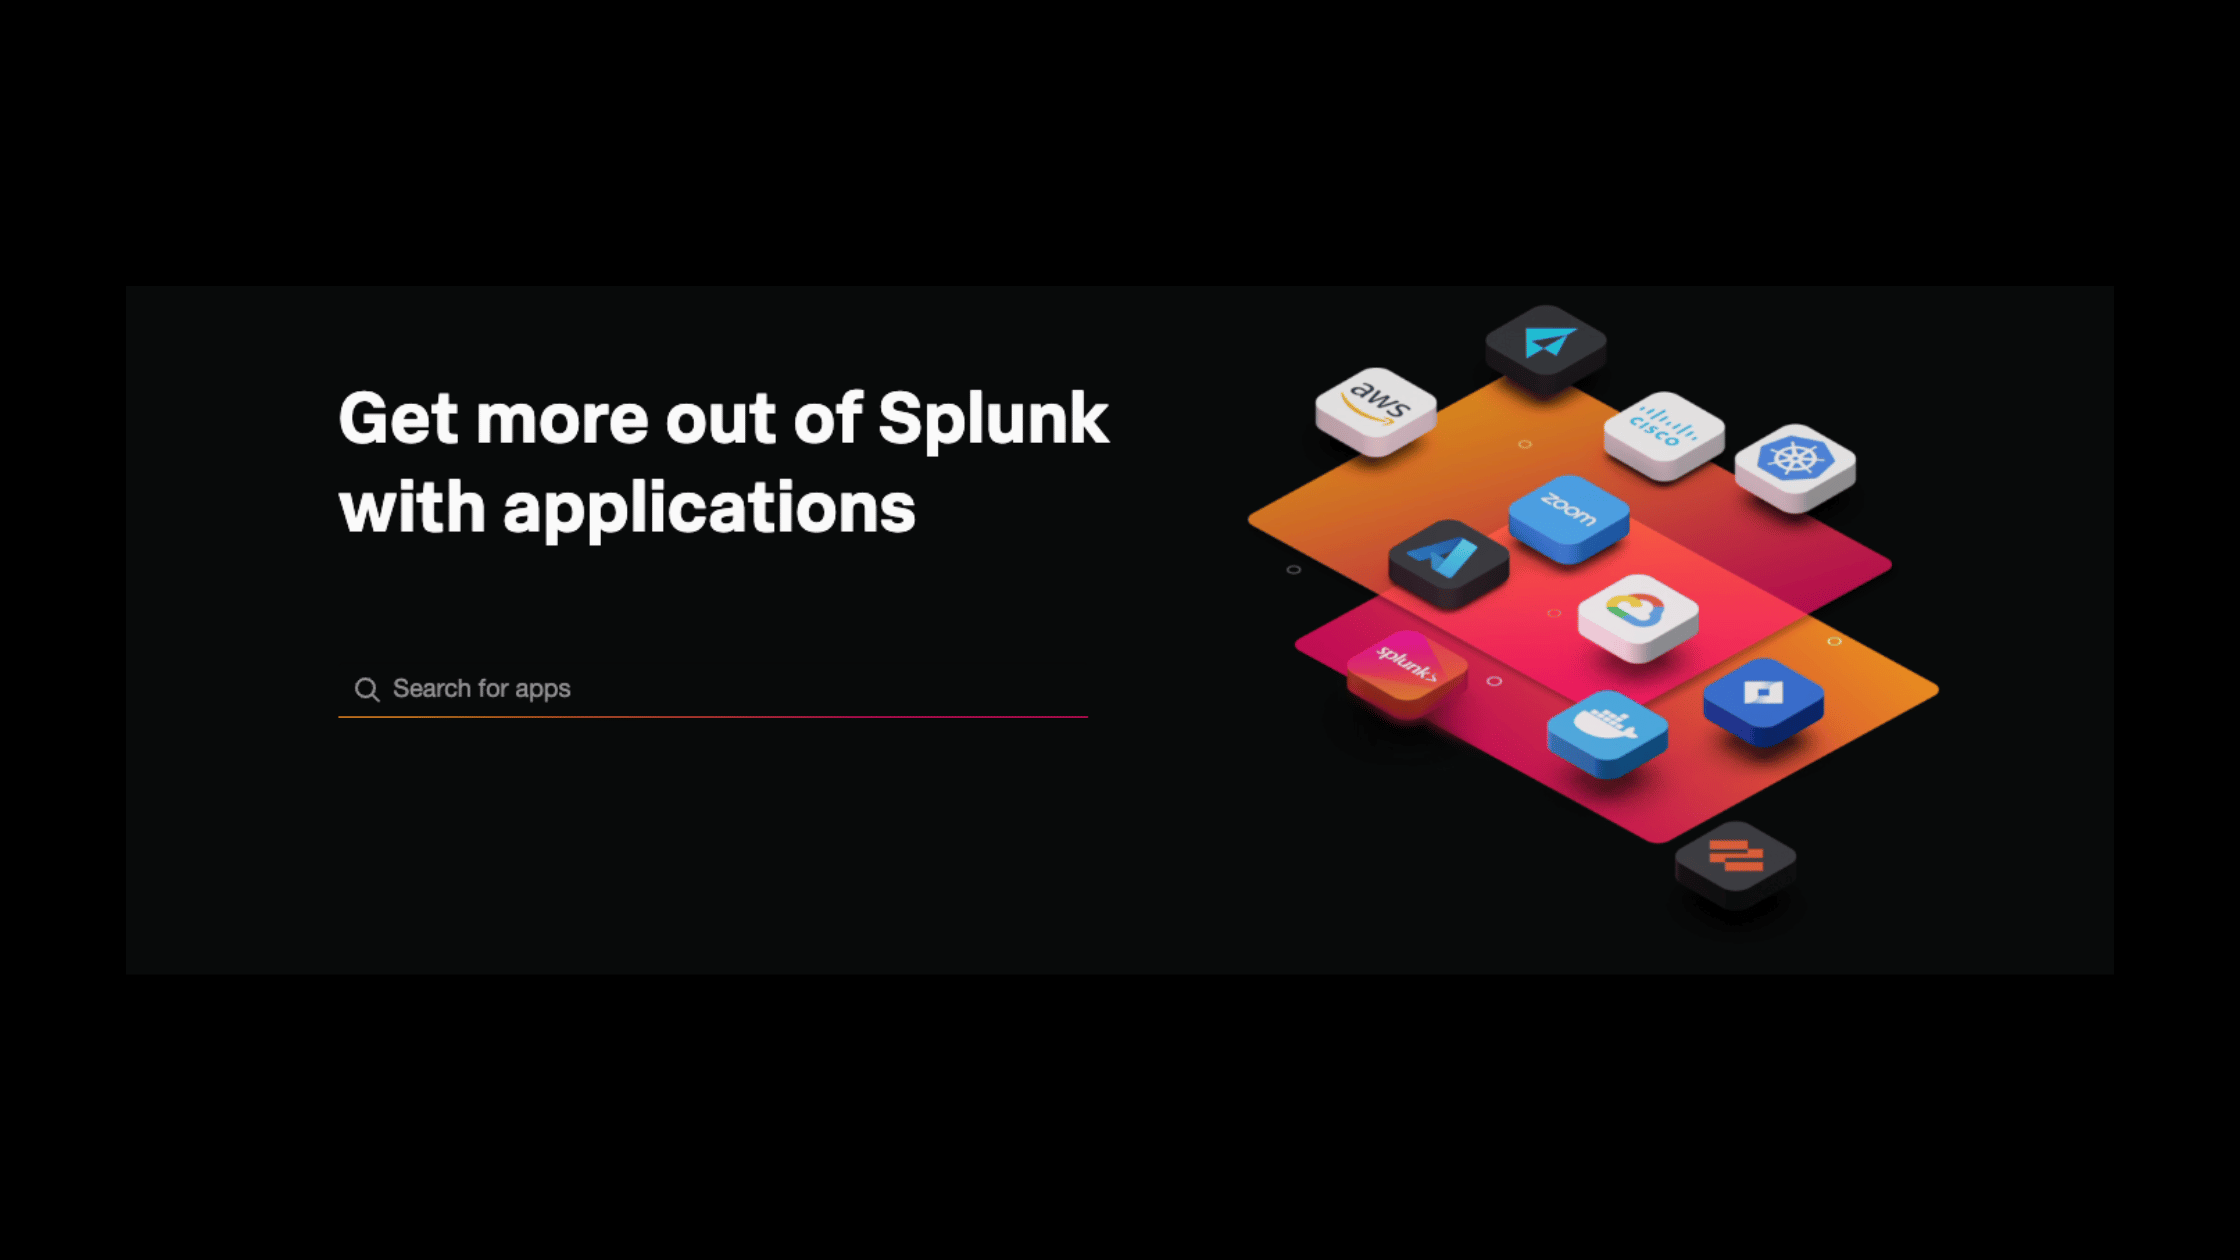 Managing Apps and Add-Ons in Splunk